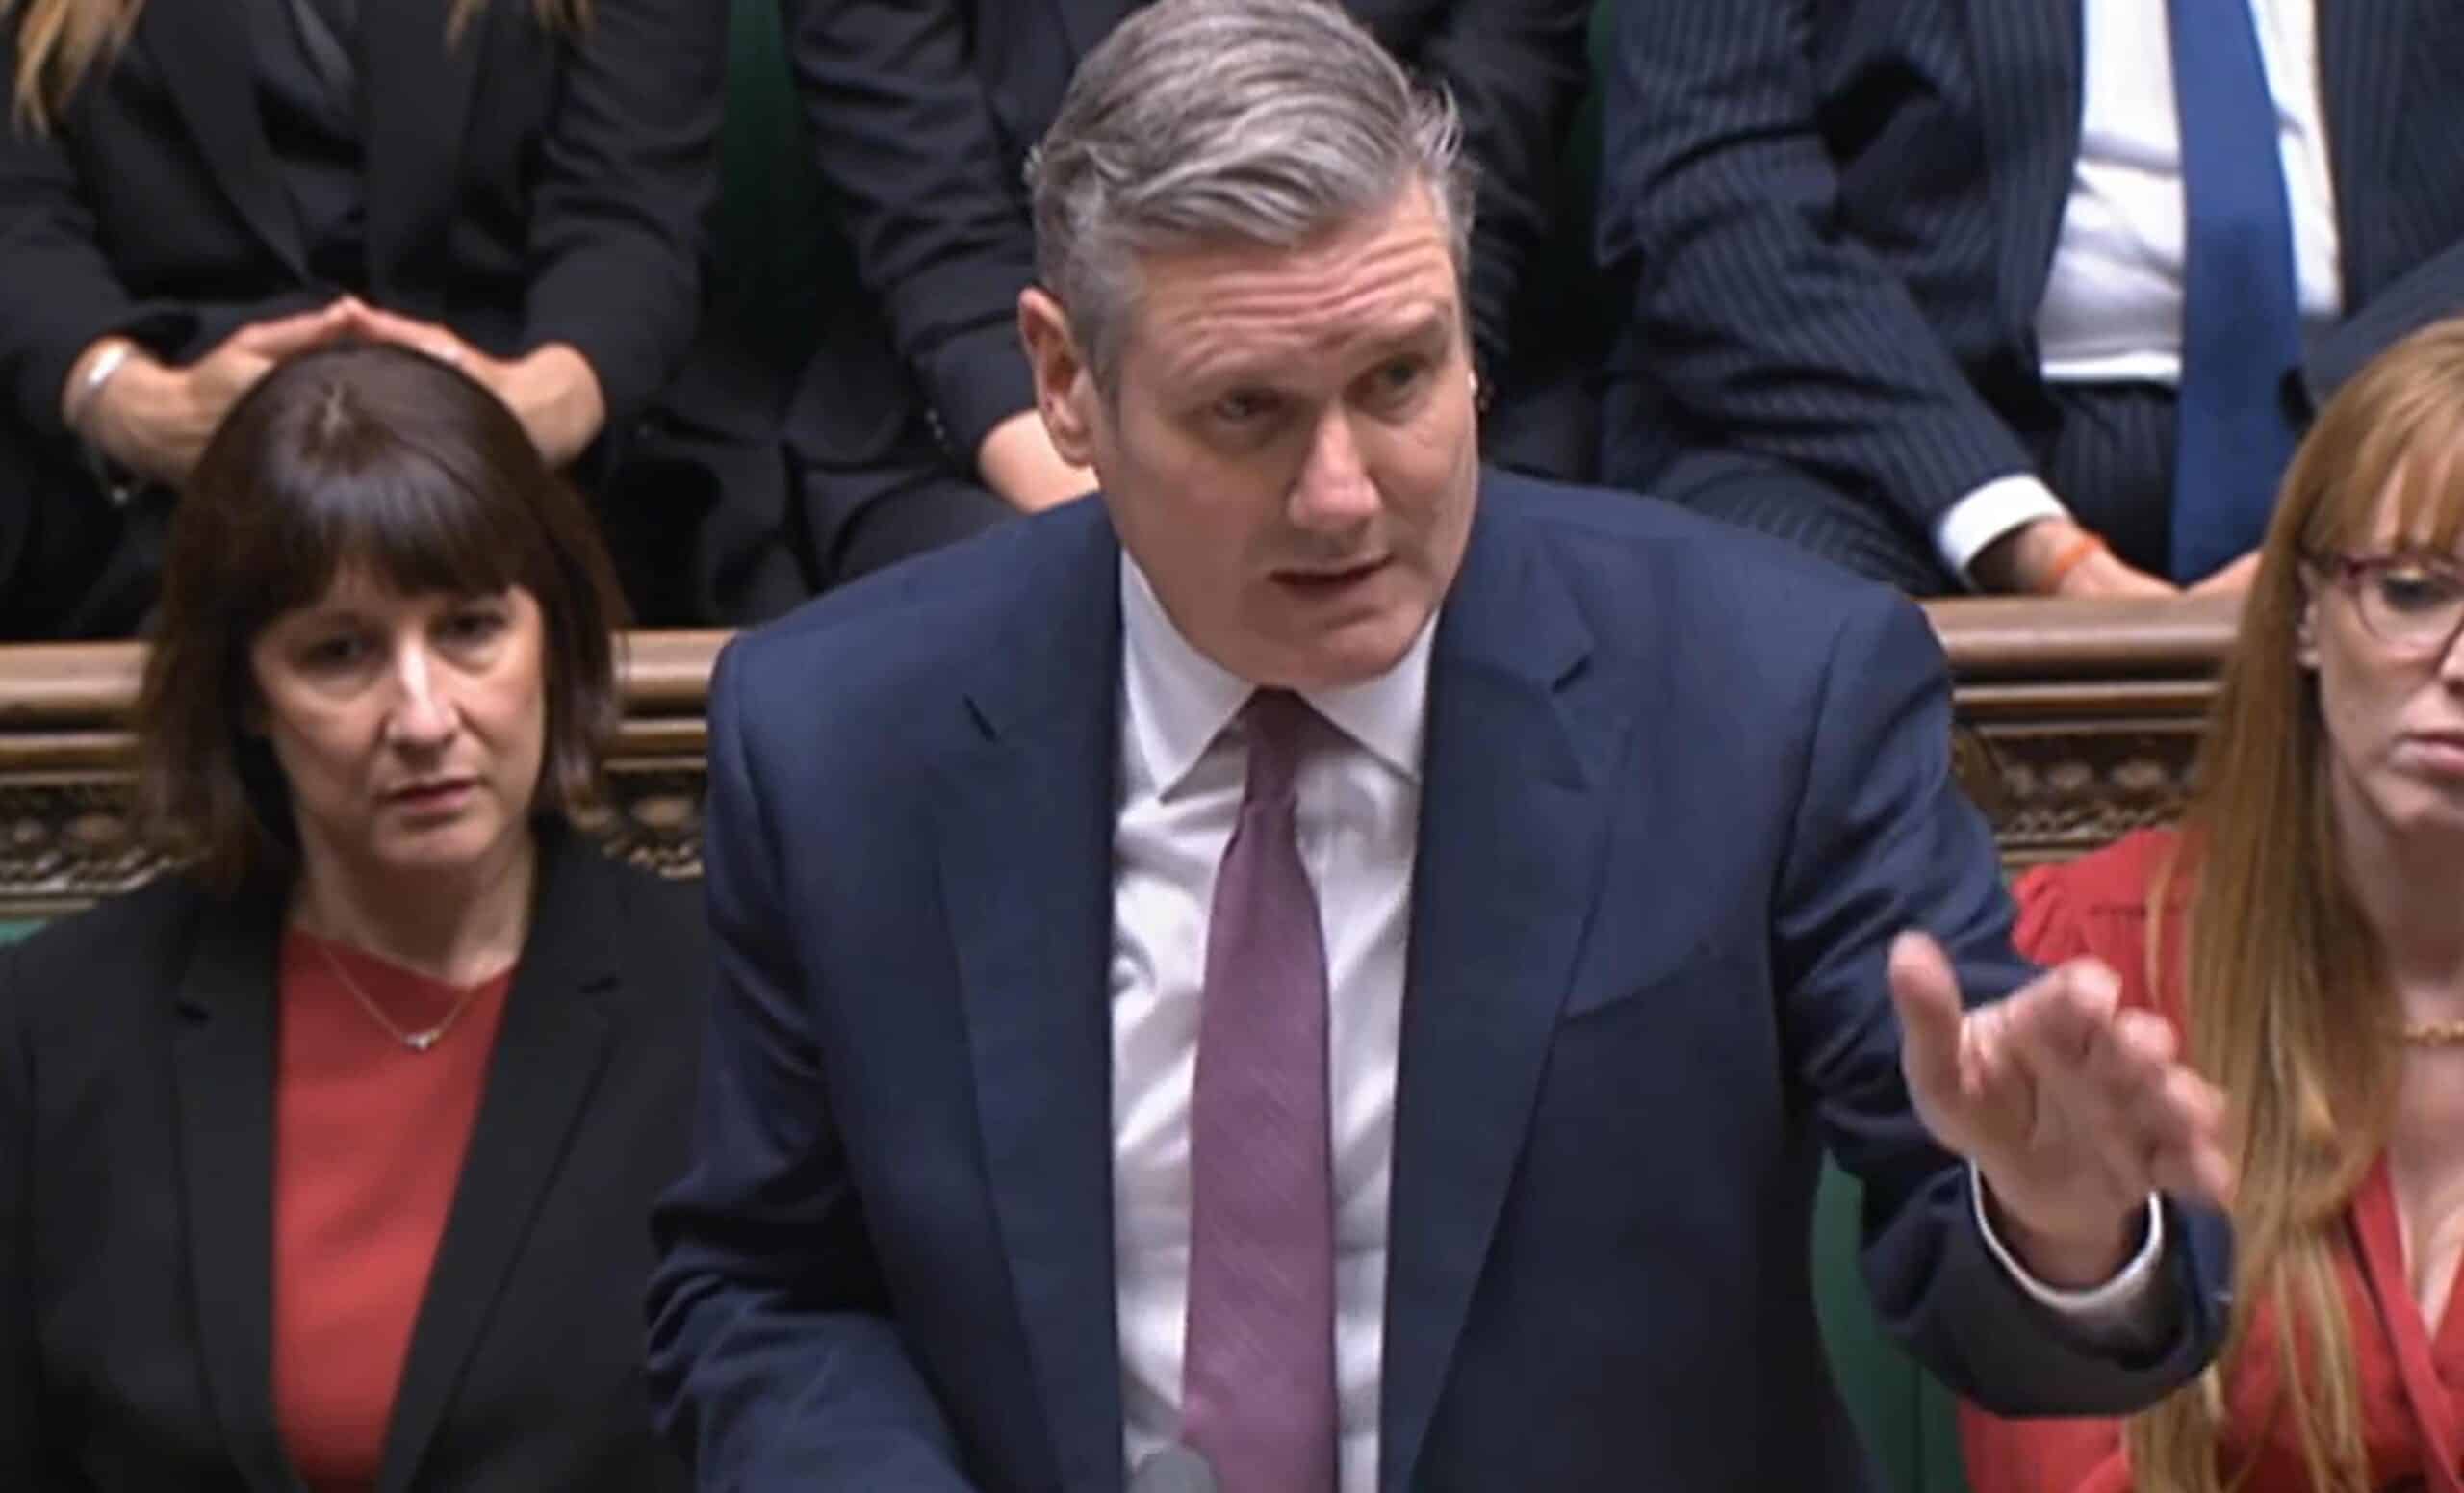 Sunak bamboozled by Starmer question ahead of autumn statement